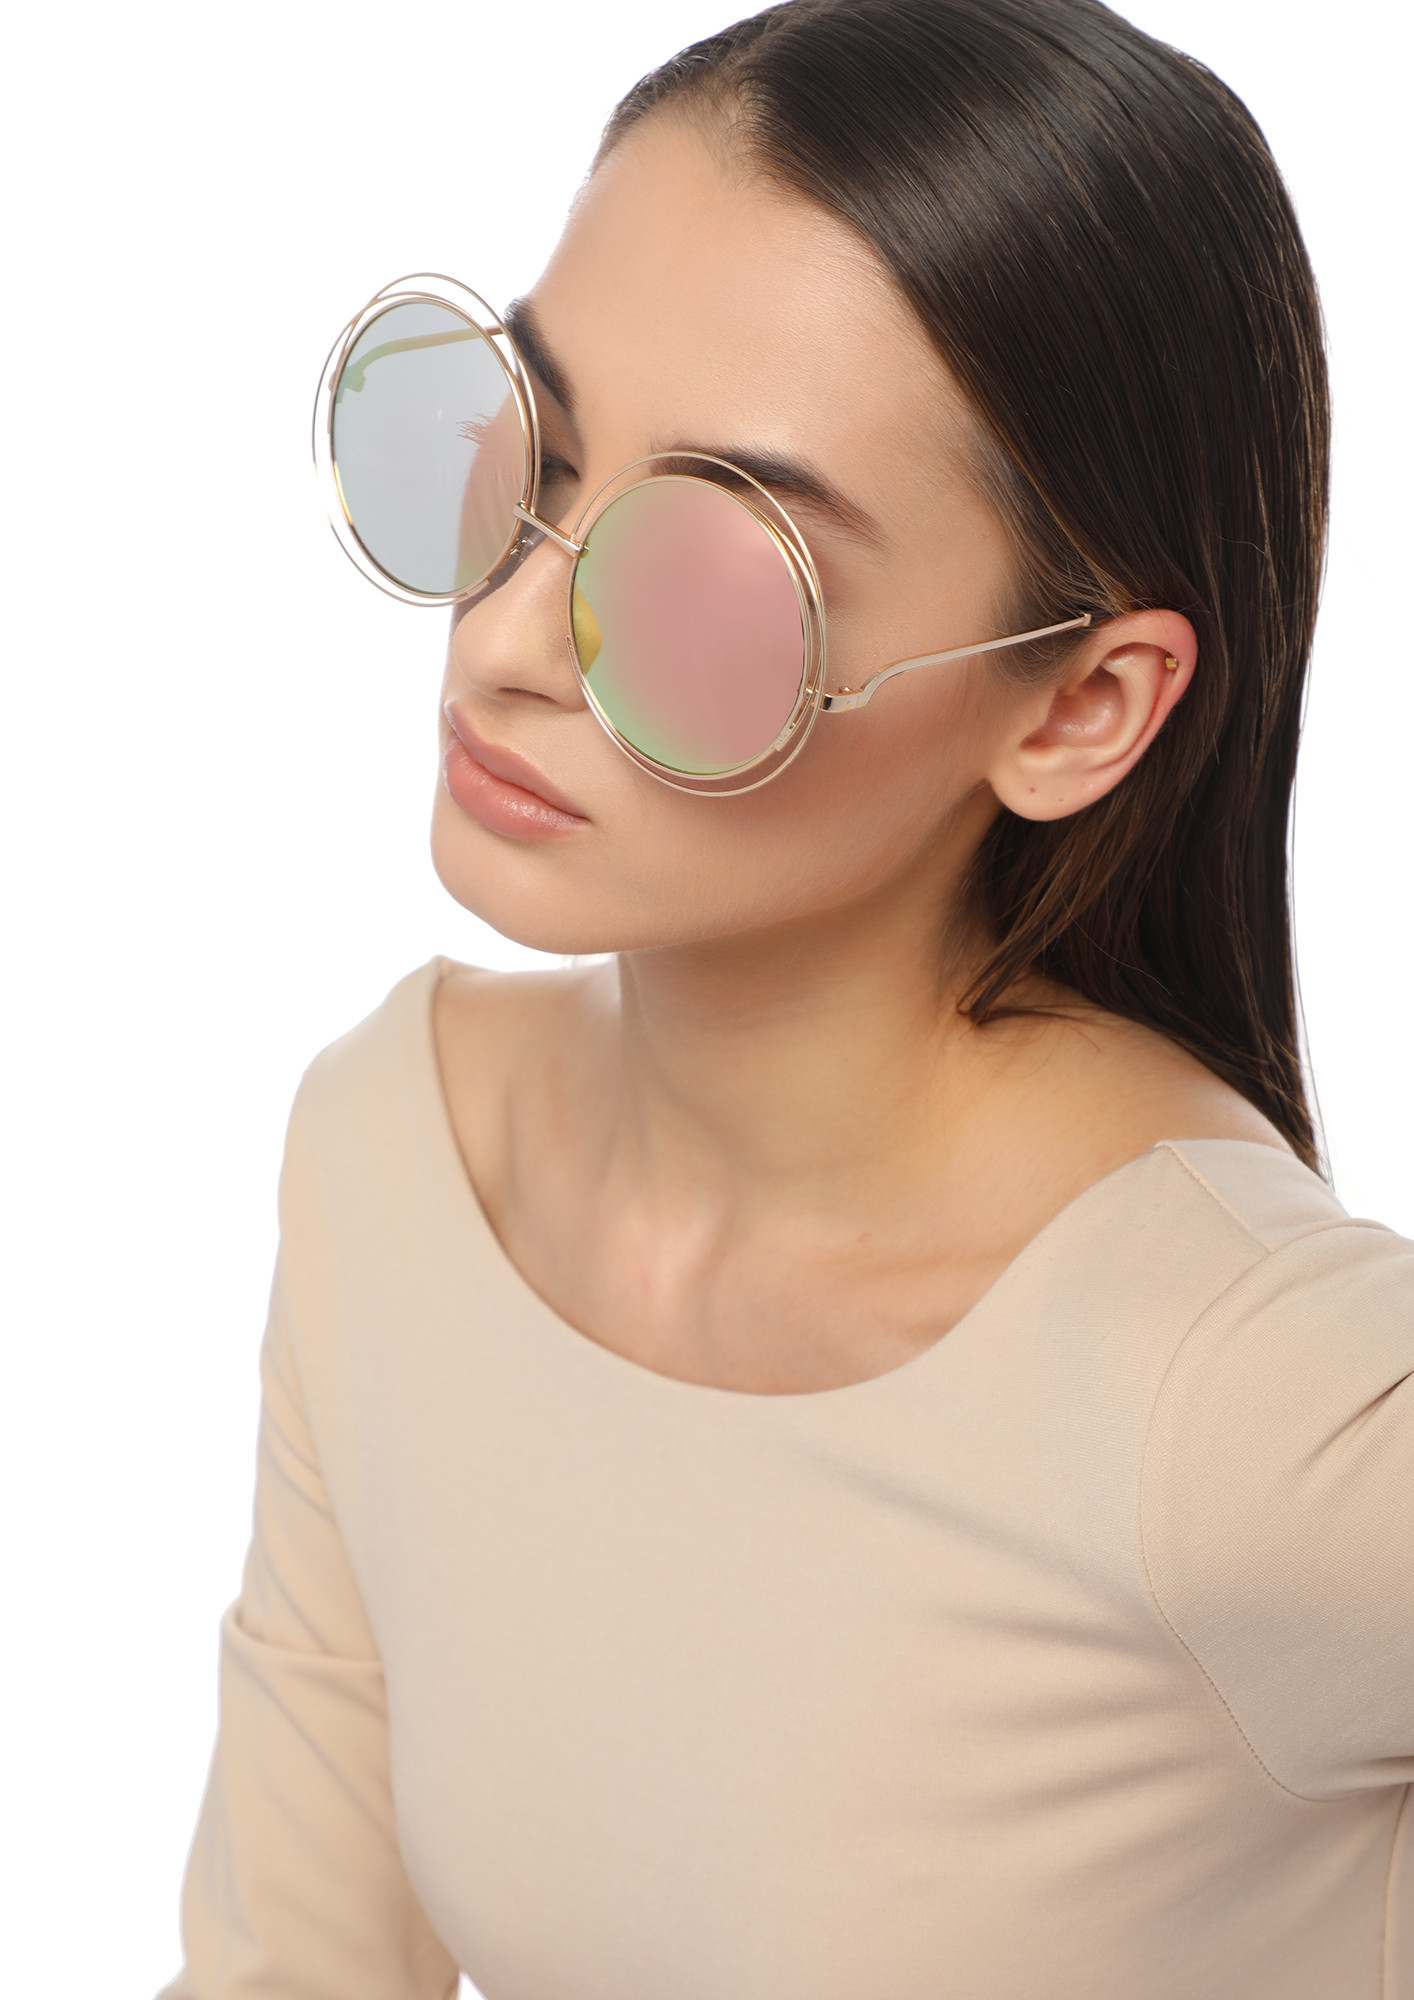 LEARNING CURVE PINK ROUND SUNGLASSES